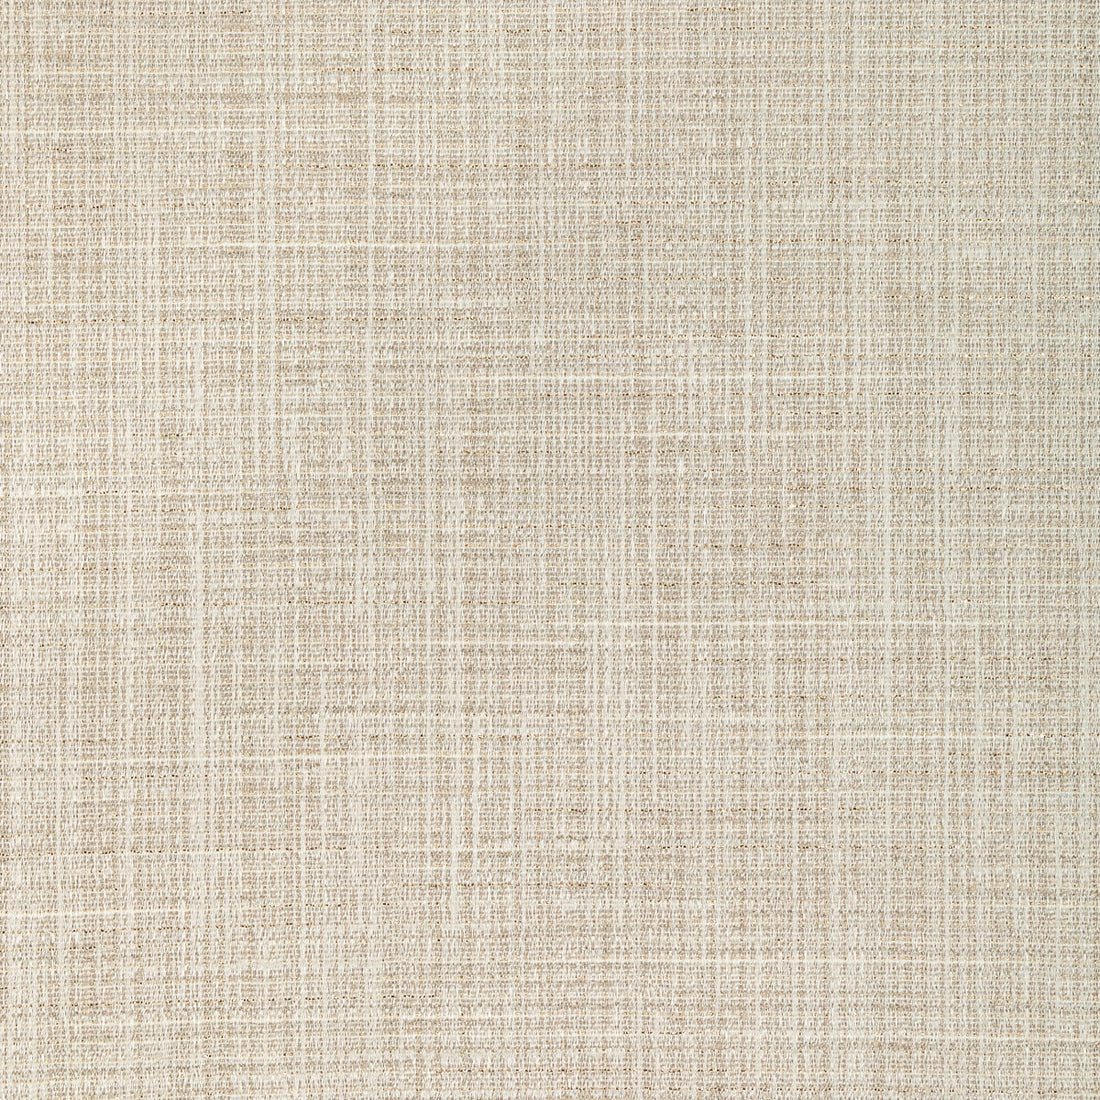 Soft Lights fabric in champagne color - pattern 36574.416.0 - by Kravet Couture in the Modern Luxe Silk Luster collection